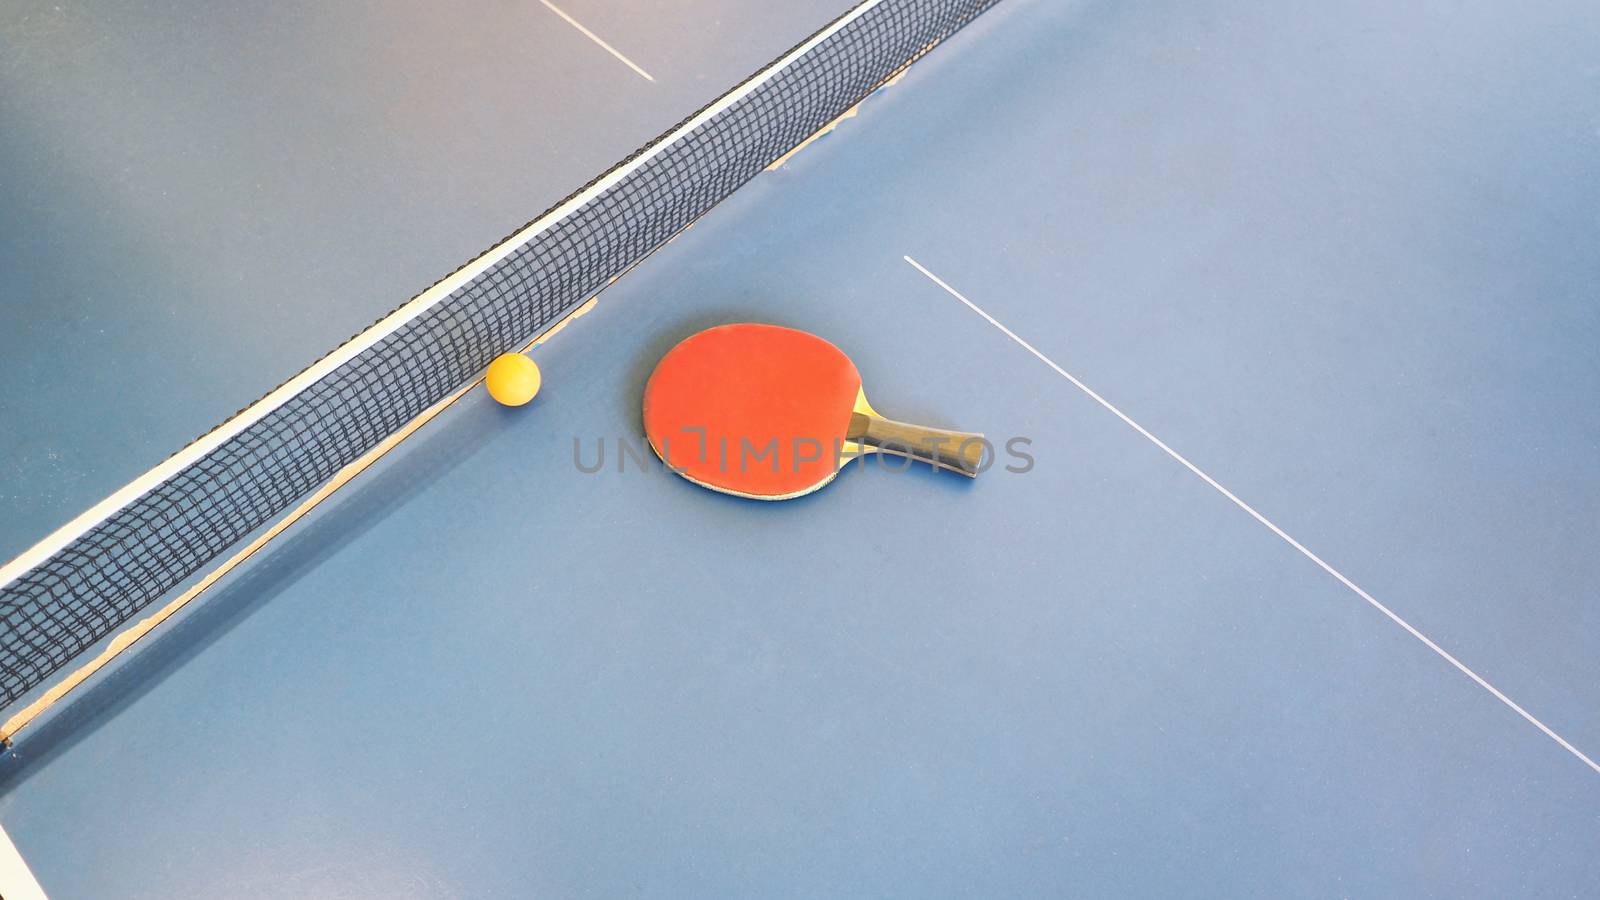 Top view of table tennis or ping-pong table by gnepphoto